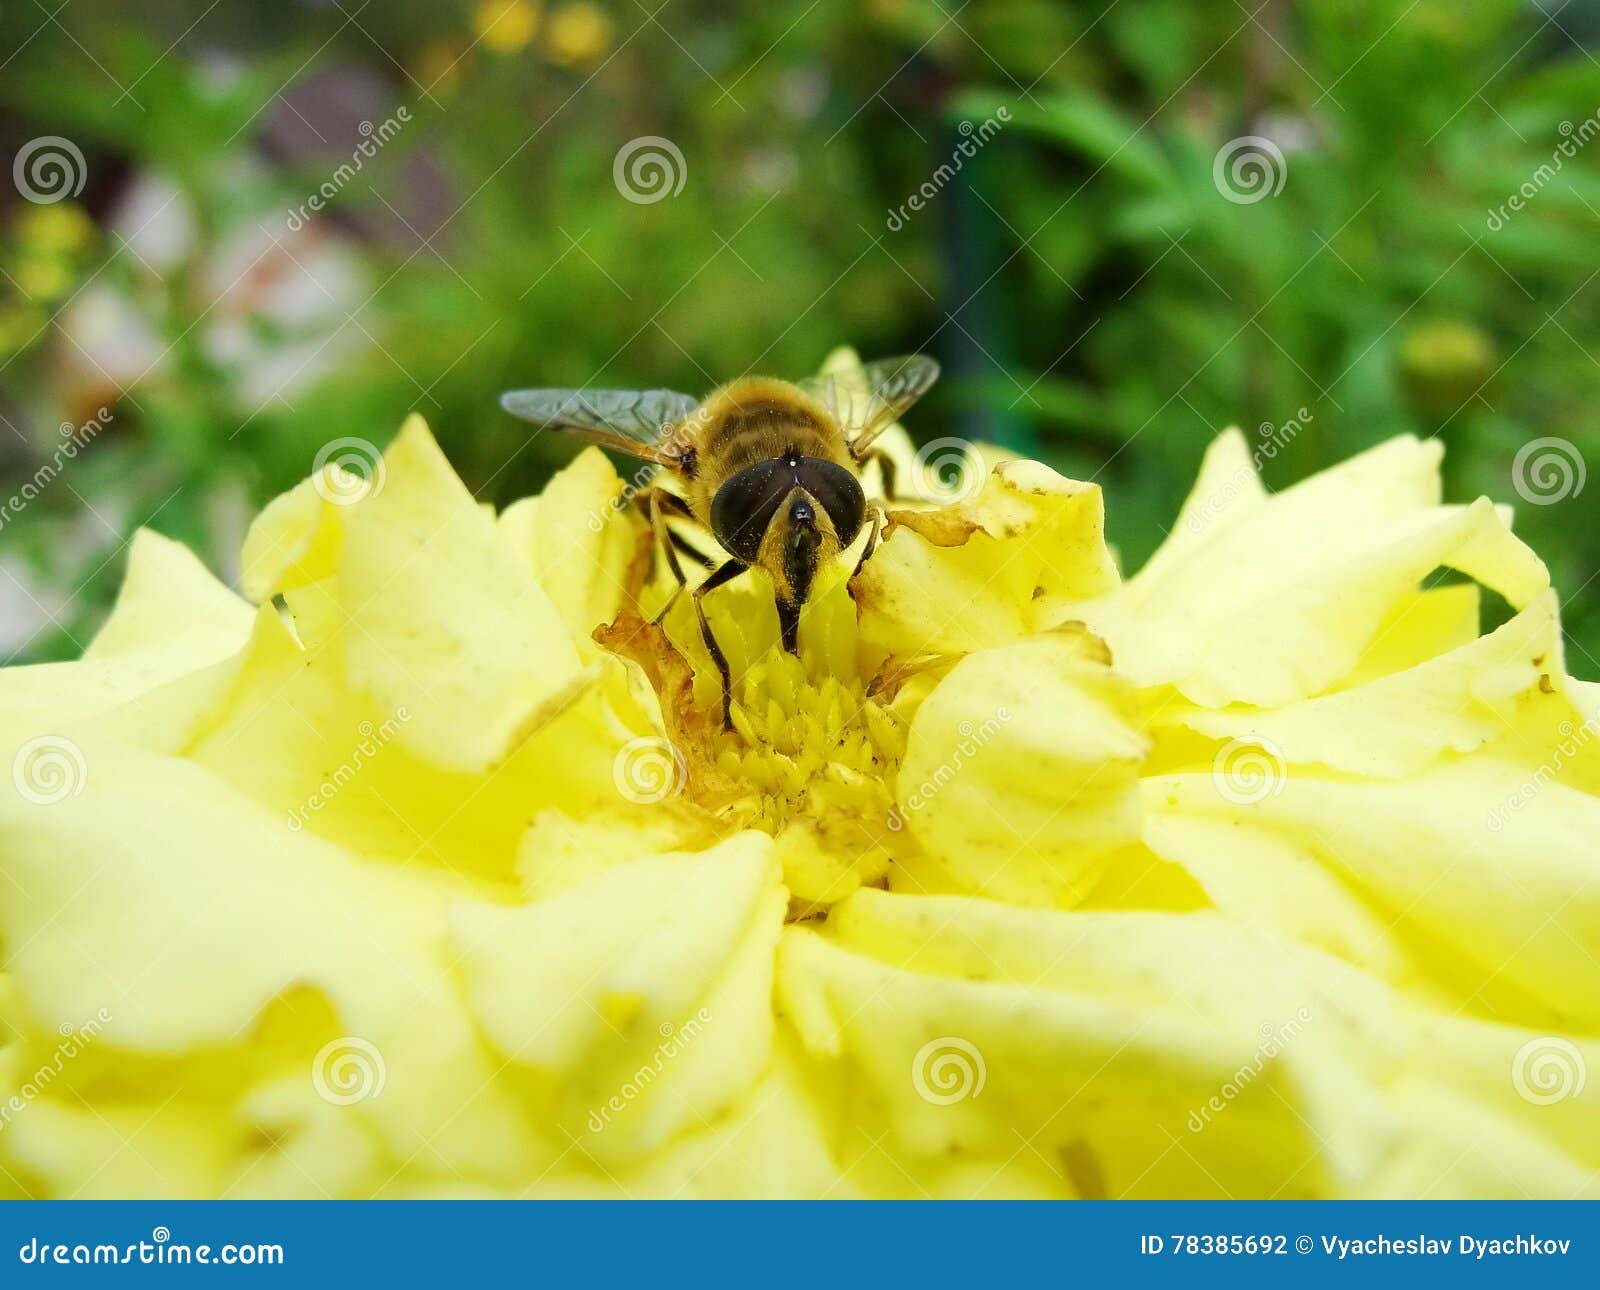 in the summer garden. wasp collects nectar on a yellow flower garden.